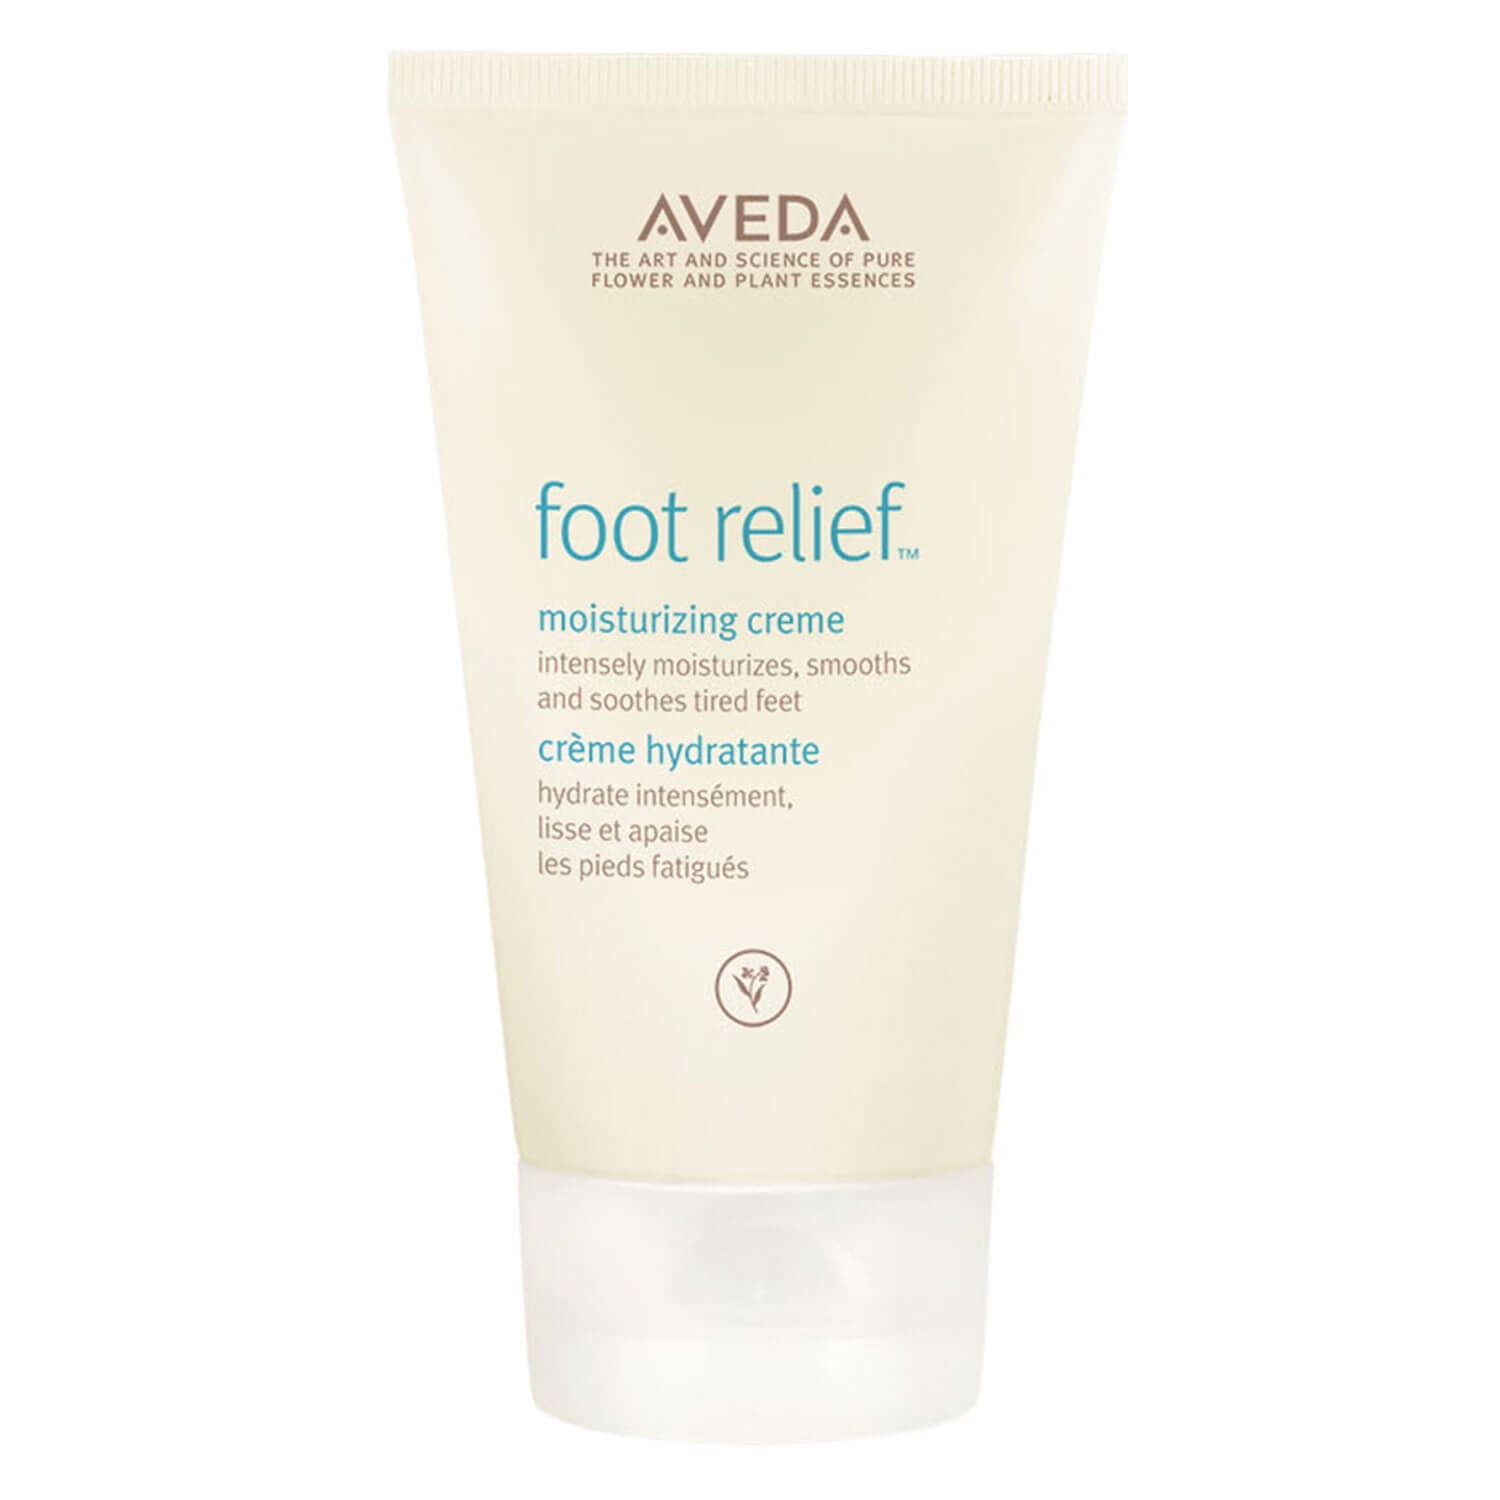 Product image from foot relief - moisturizing creme